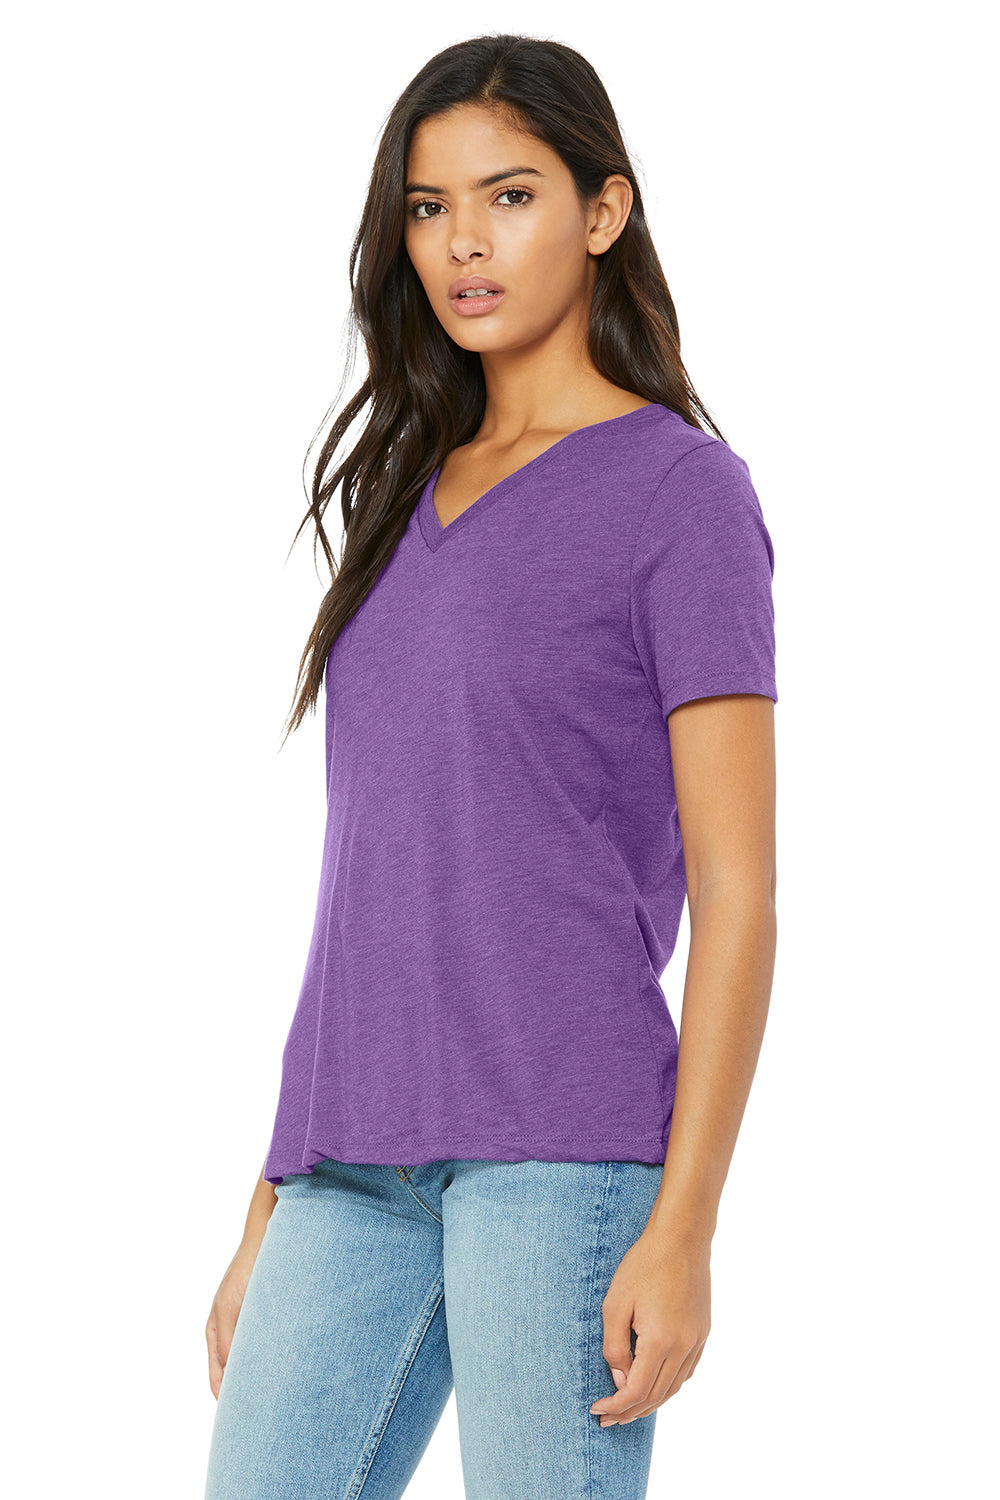 Bella + Canvas BC6405/6405 Womens Relaxed Jersey Short Sleeve V-Neck T-Shirt Purple Triblend Model 3Q